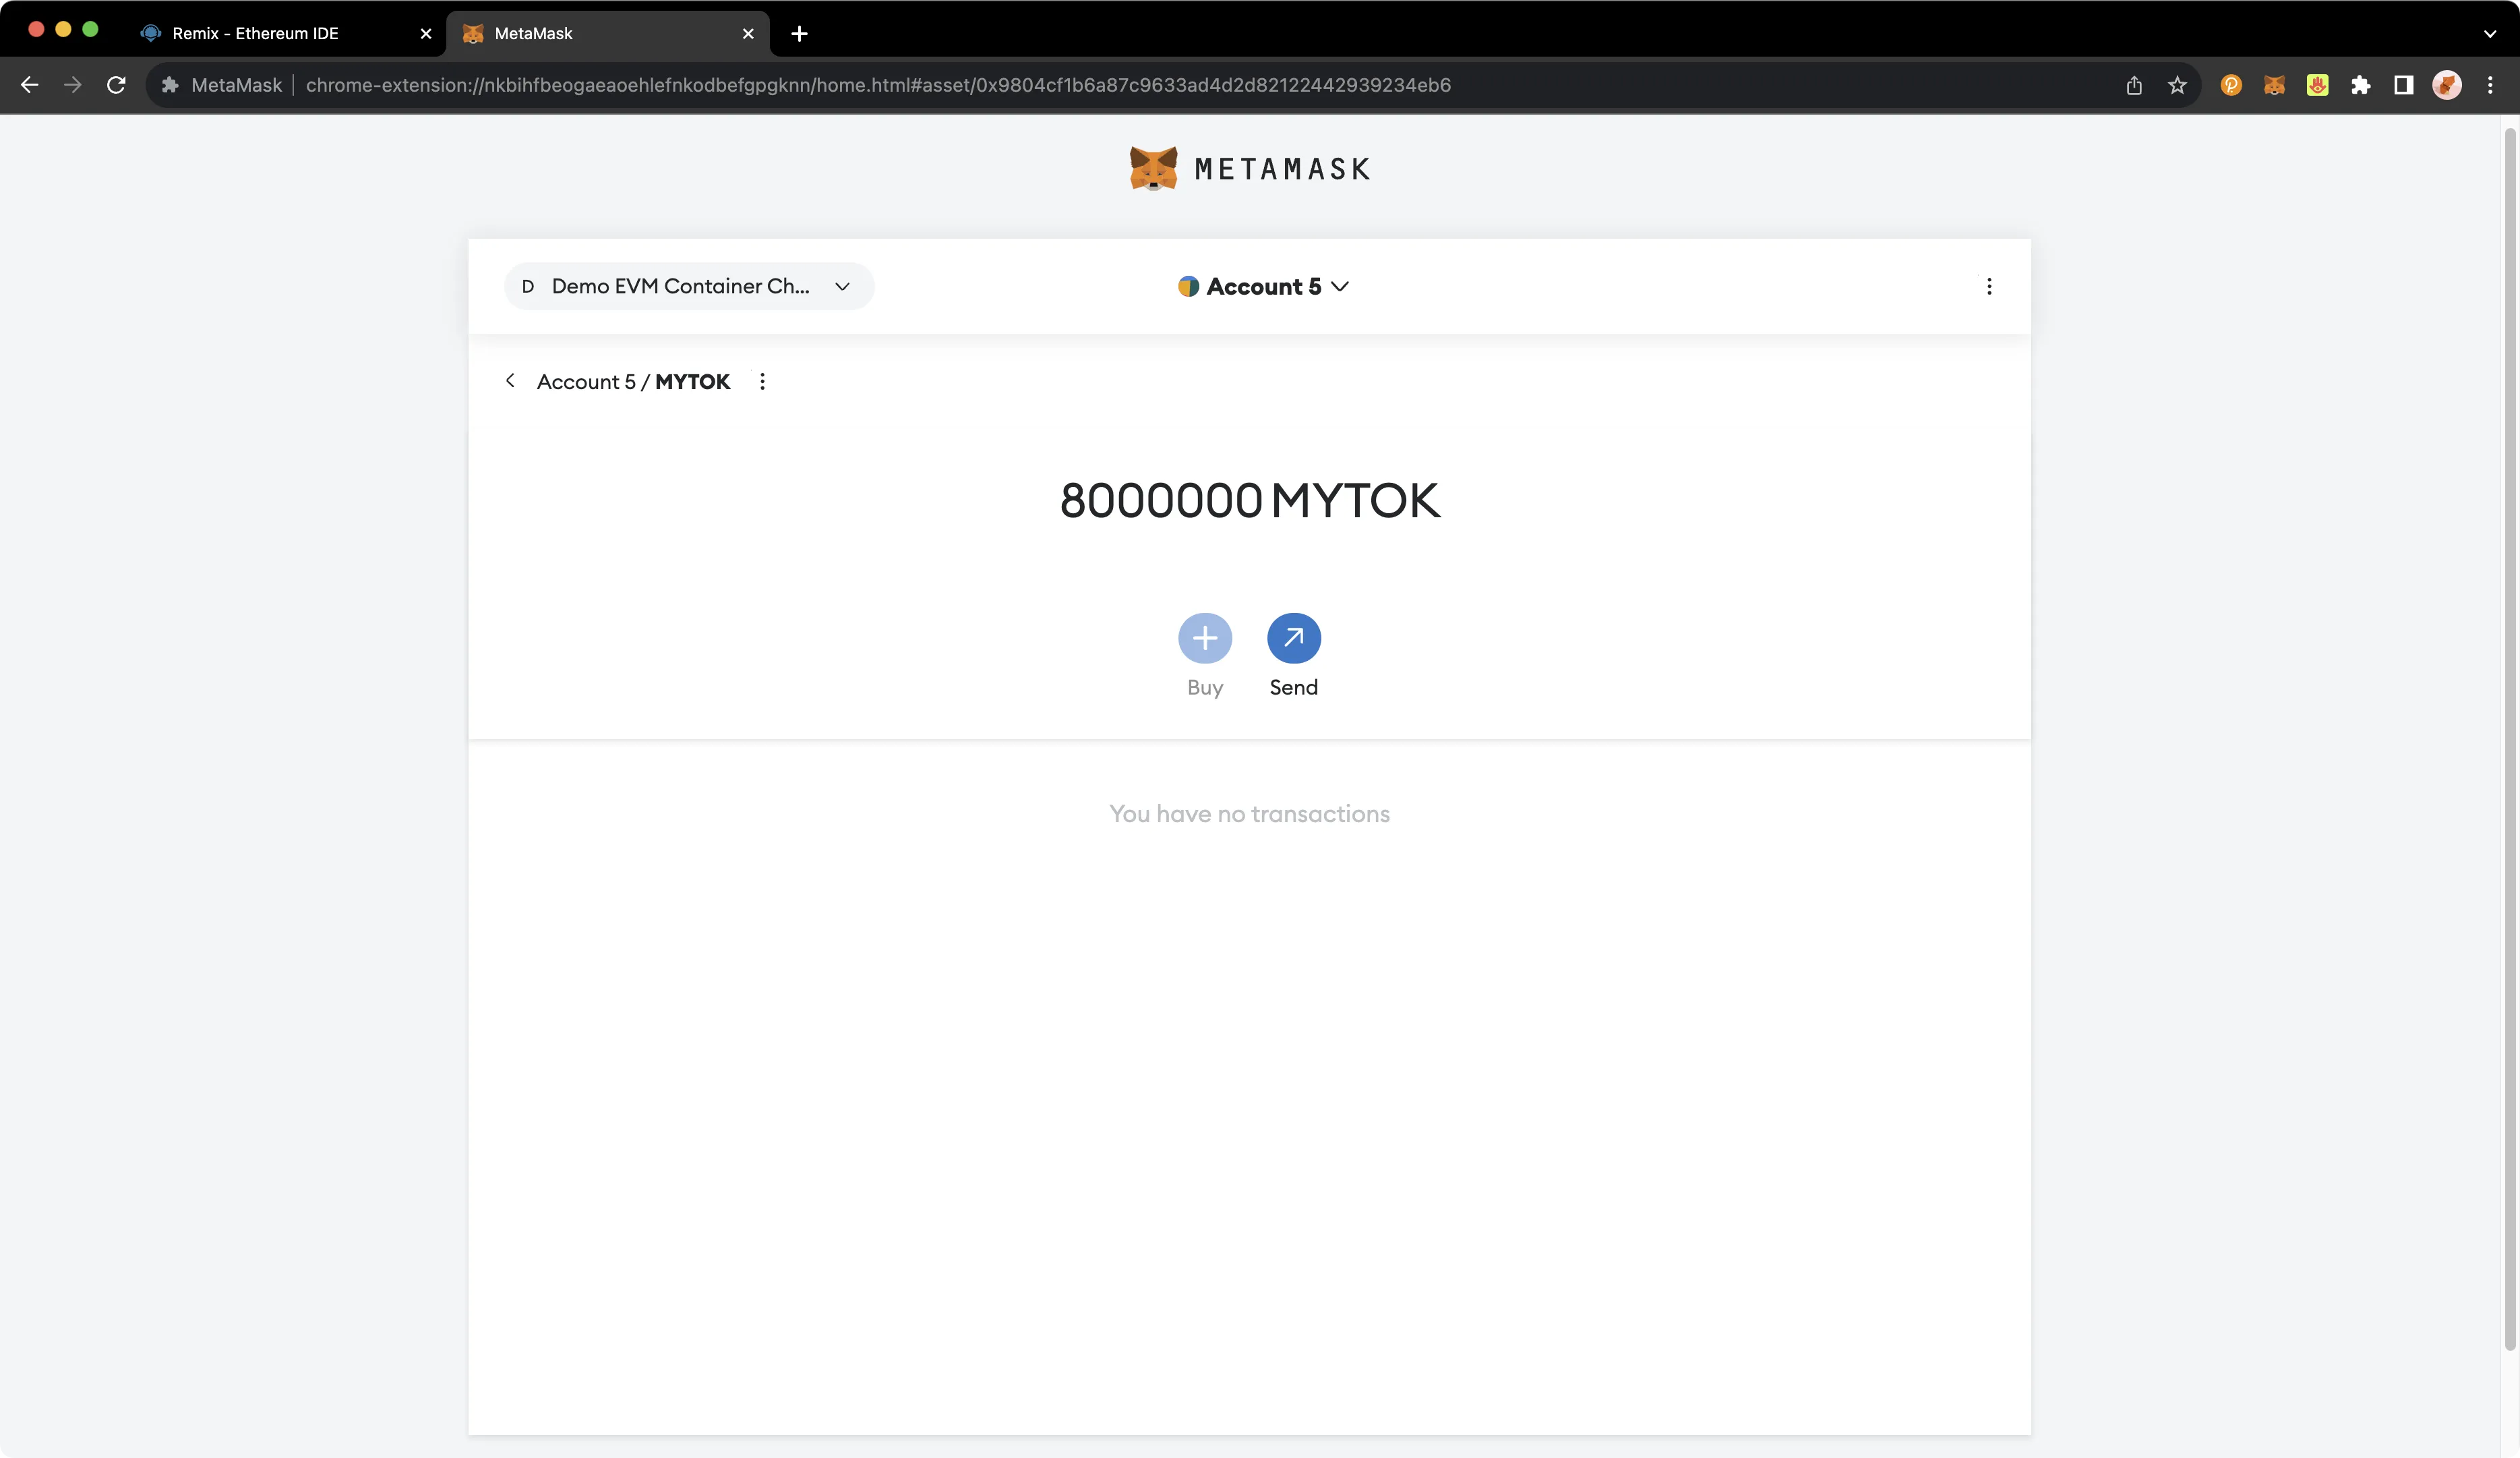 Add the tokens to your MetaMask account